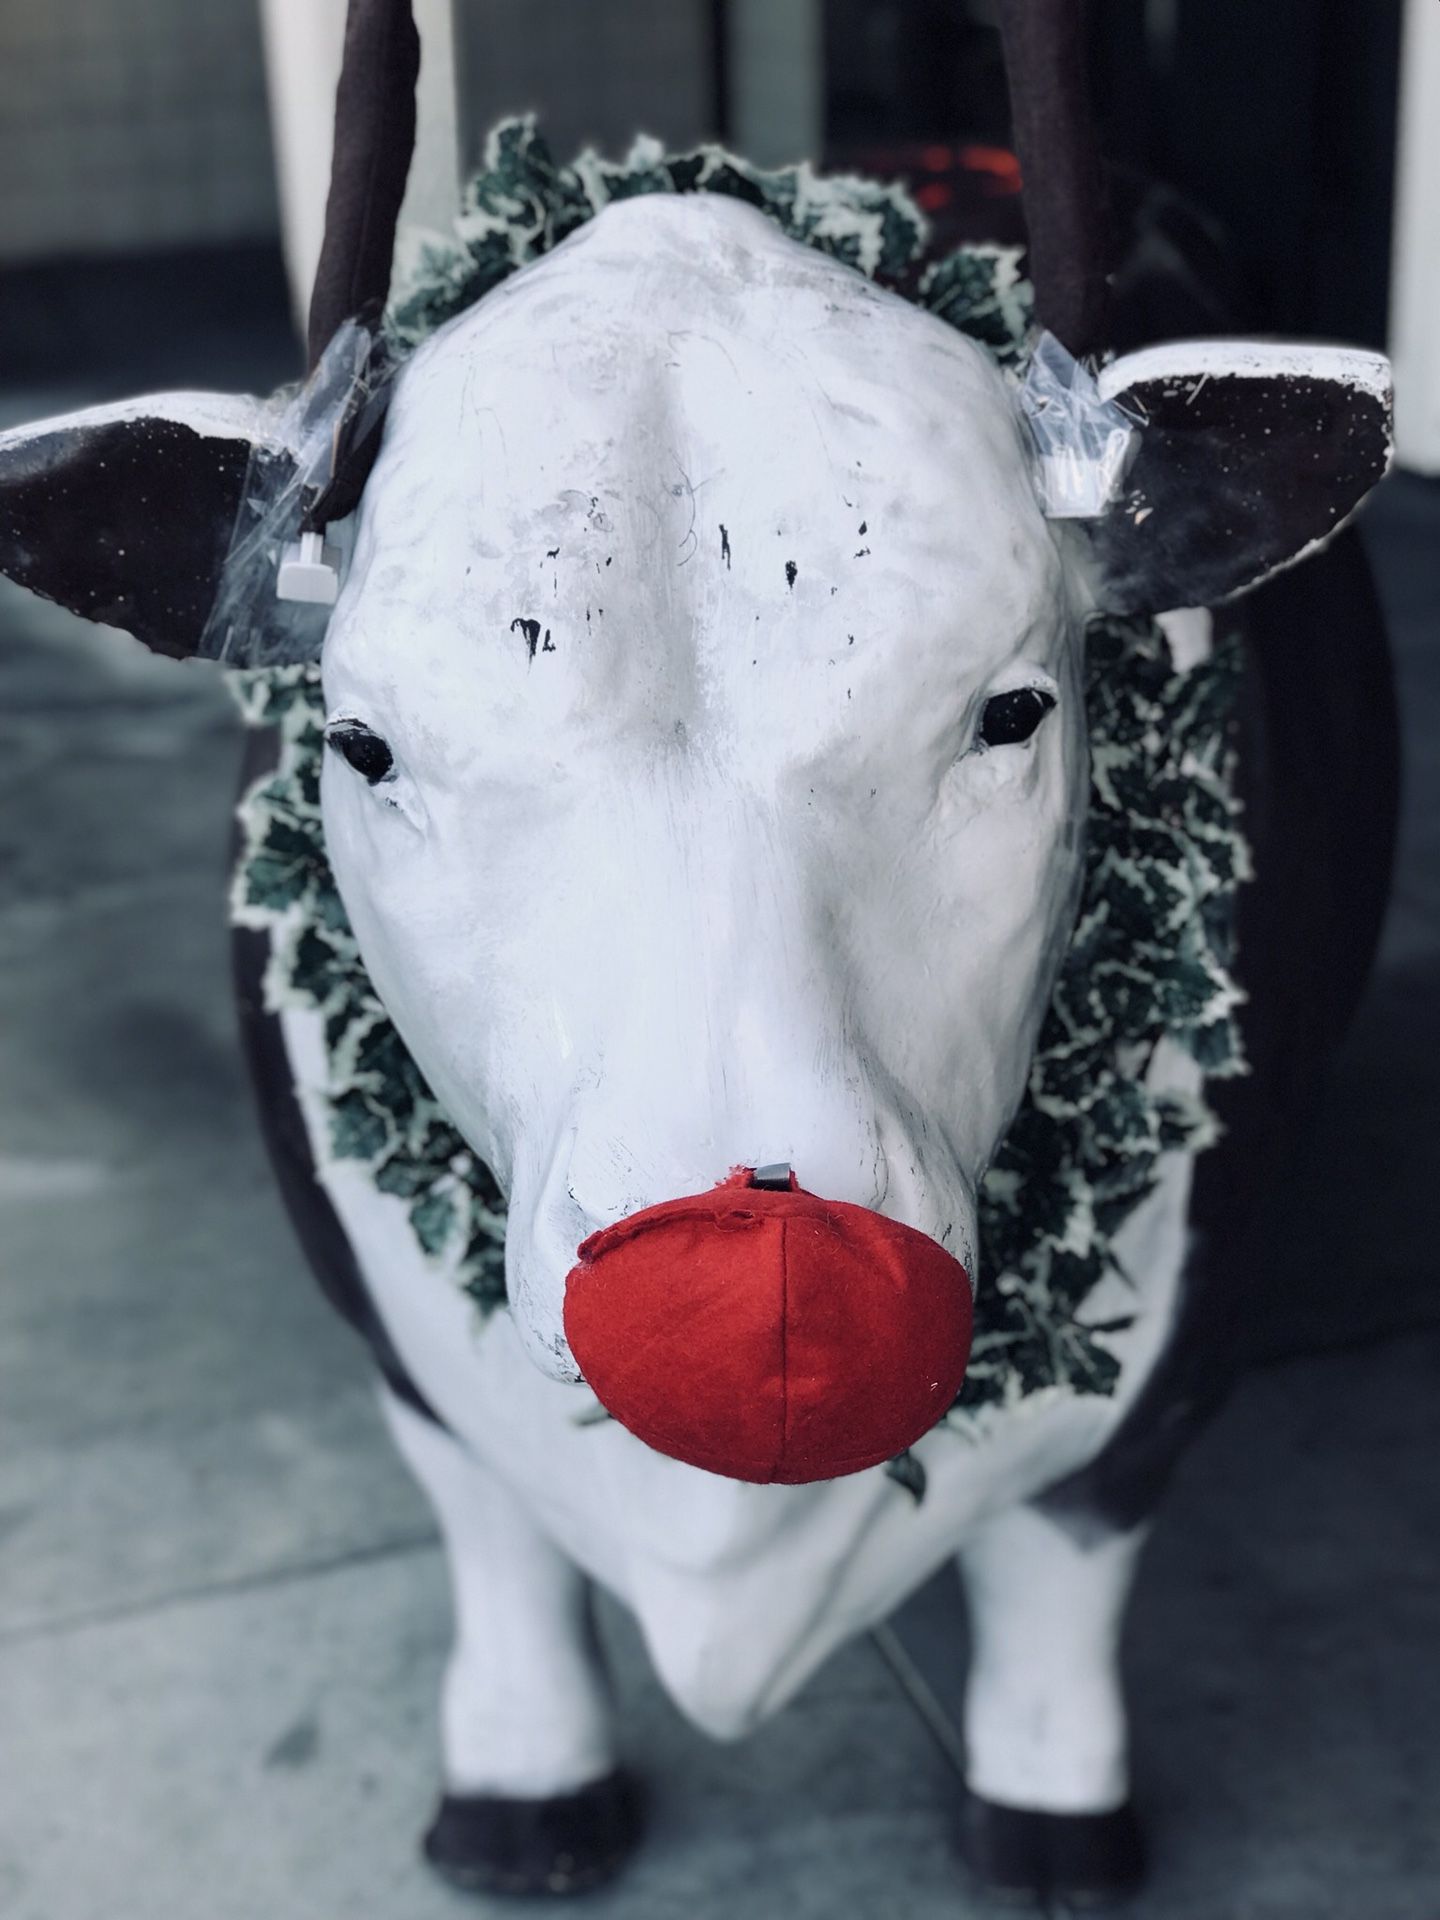 Happy holidays....from Betsy the ole 2 ton heifer